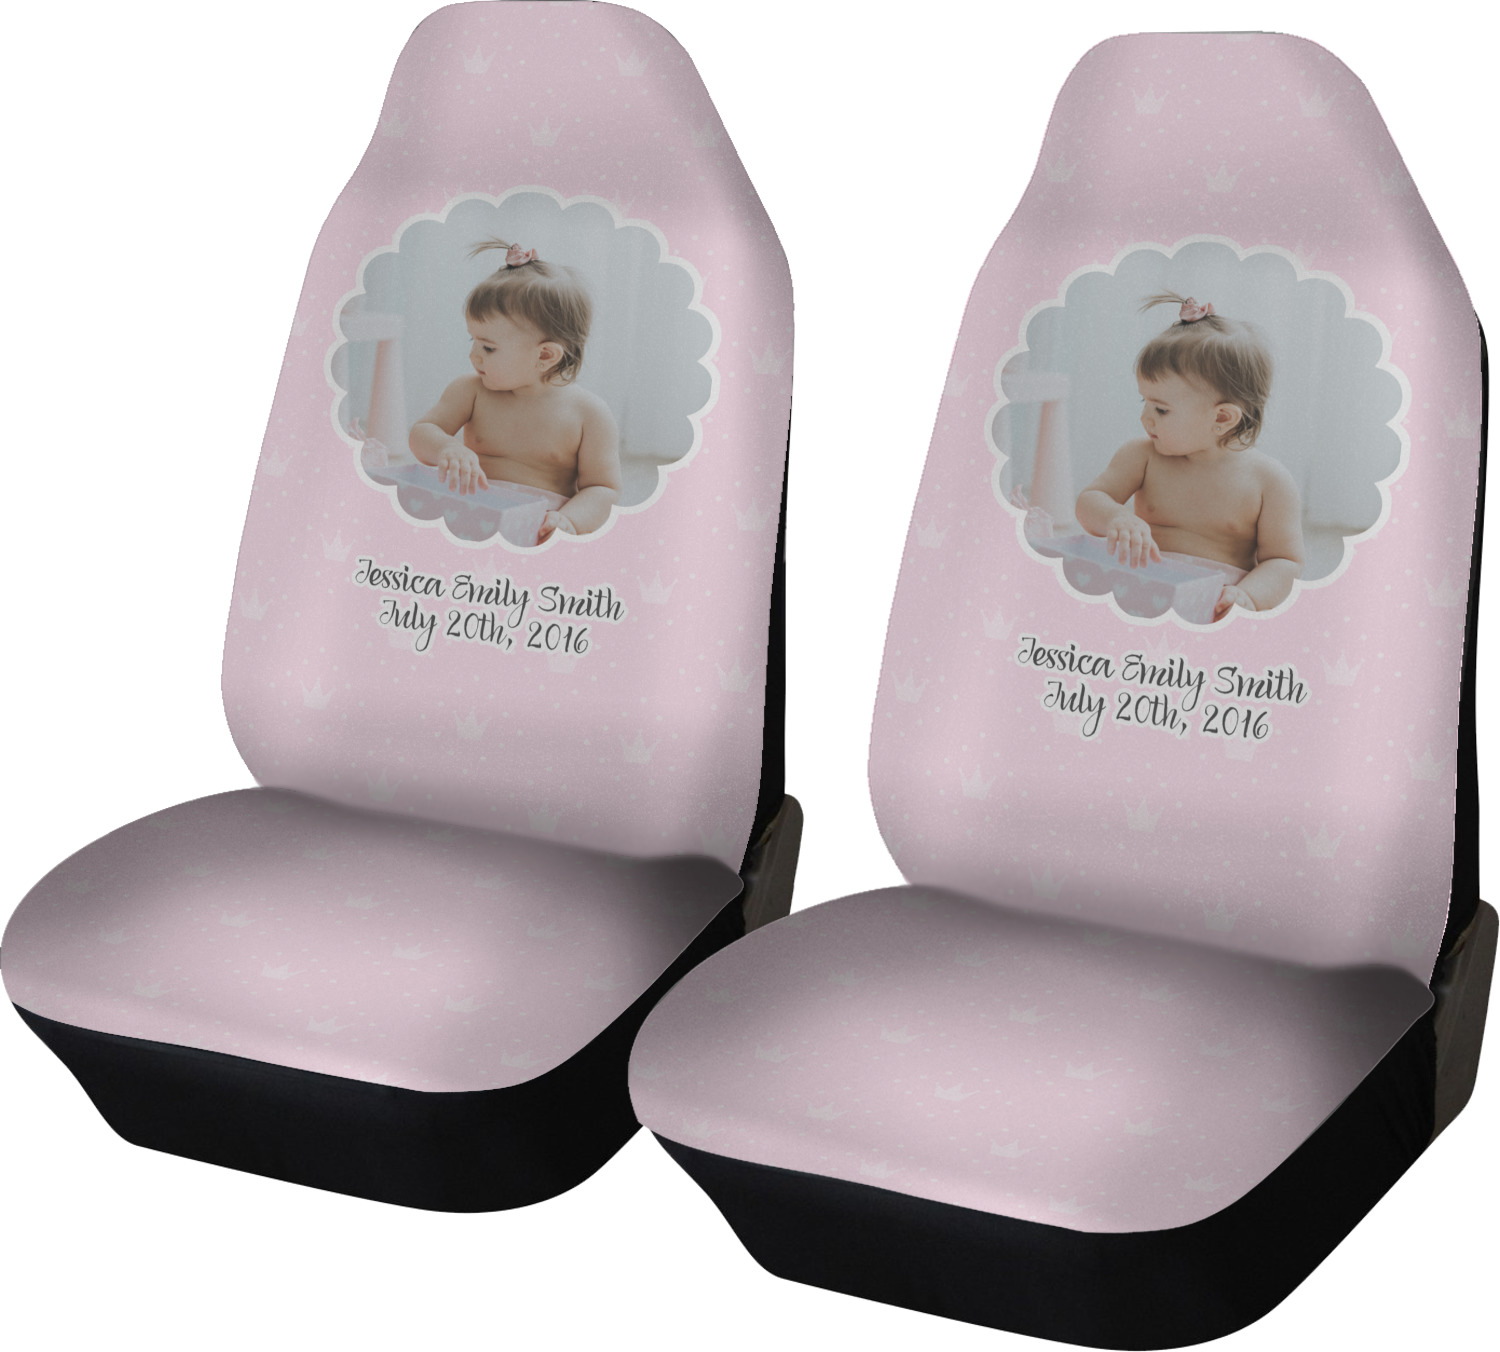 Baby Girl Photo Car Seat Covers 2 ?lm=1555139599